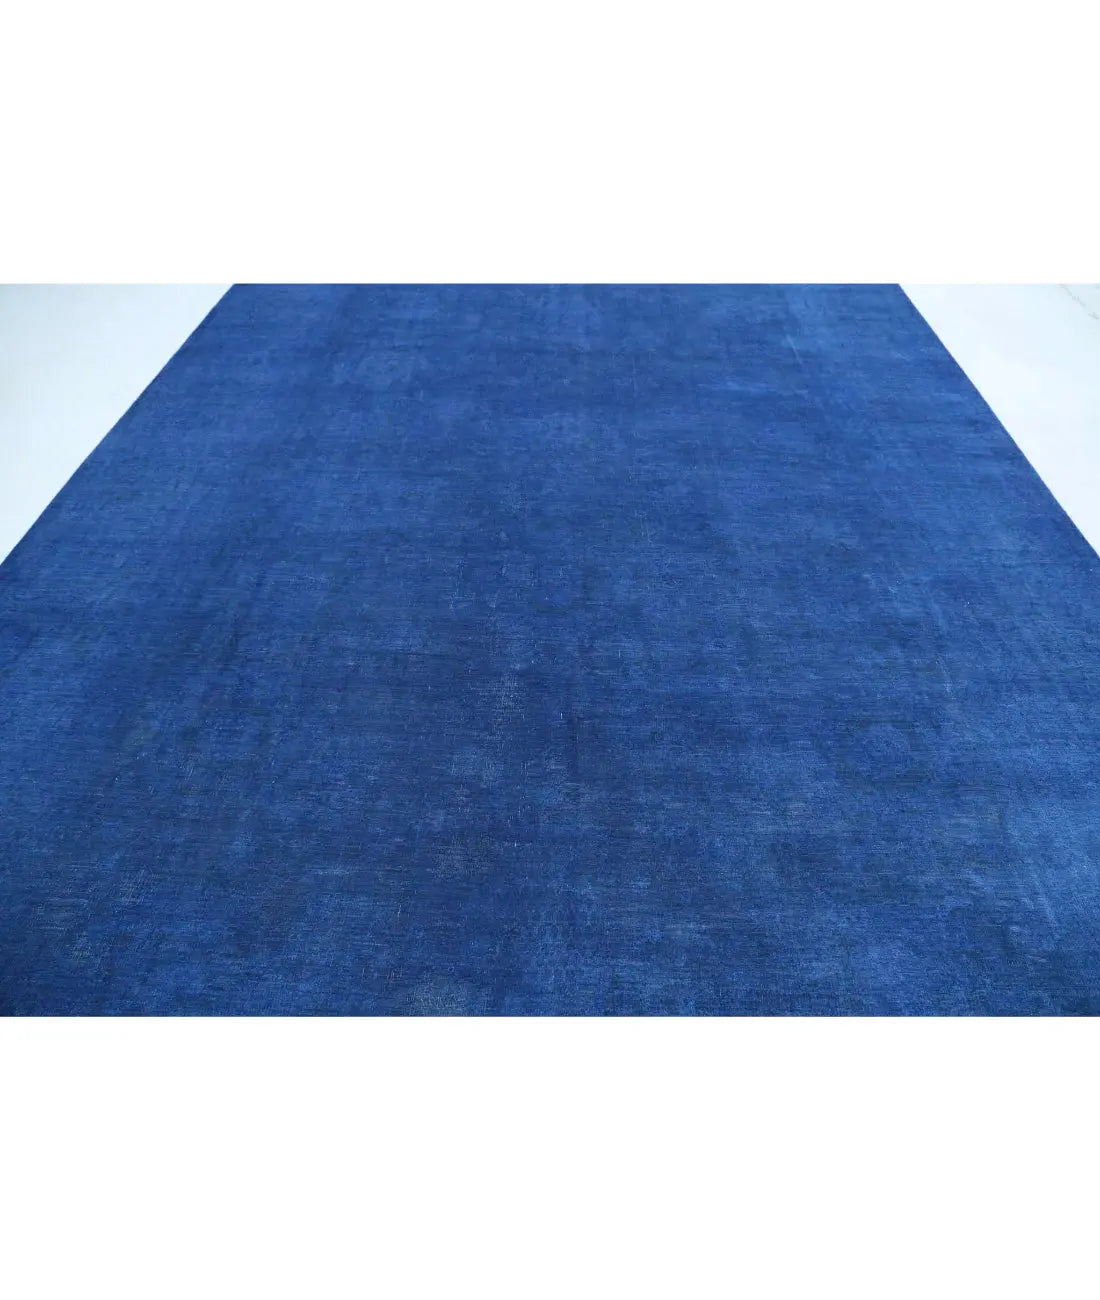 Hand Knotted Fine Overdye Wool Rug - 9'7'' x 13'6''